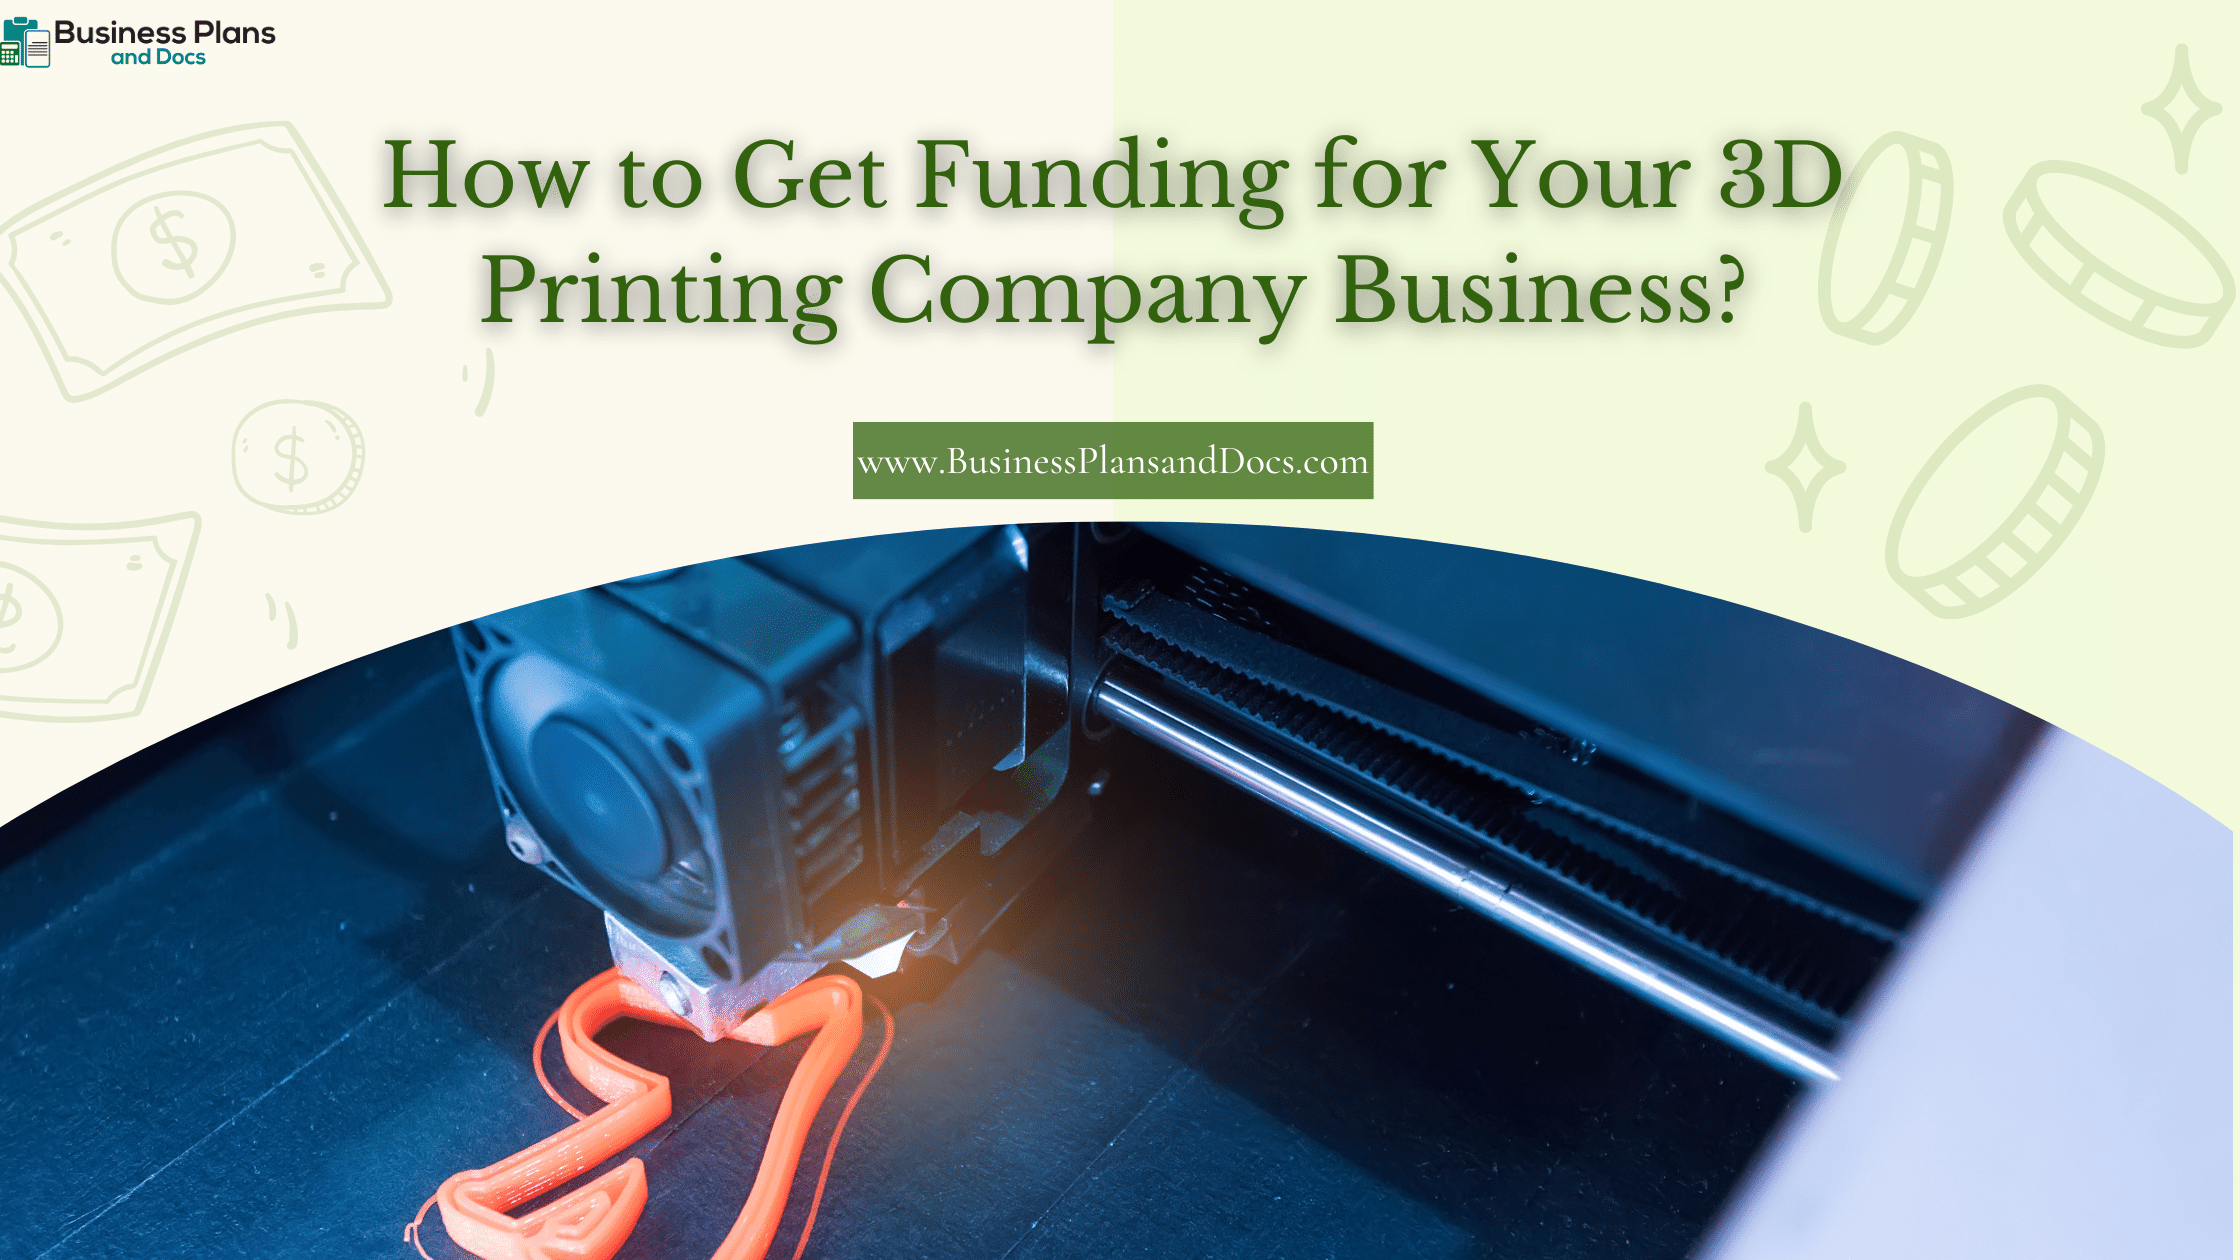 How to Get Funding for Your 3D Printing Company Business?